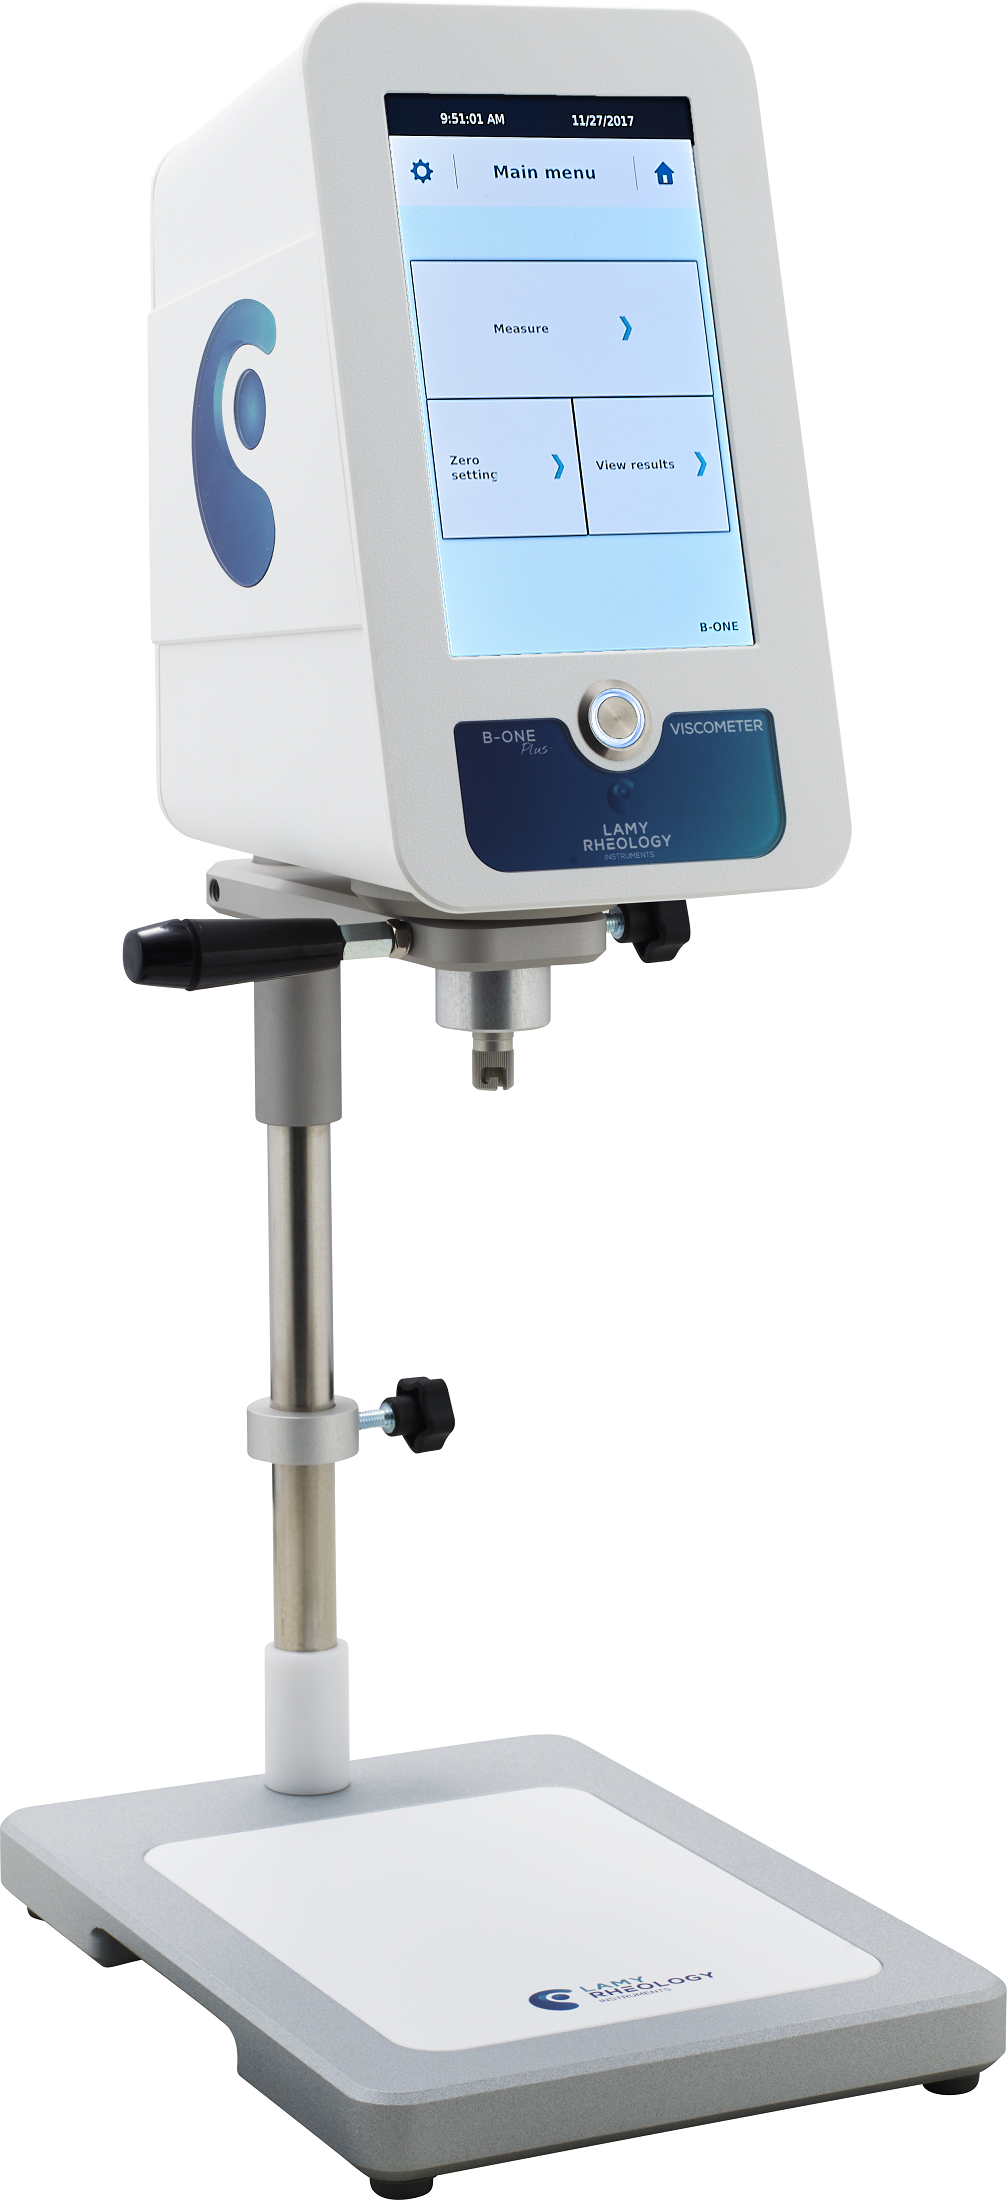 Lamy Rheology B-ONE Plus Rotating SpringLess Viscometer with 7" Touch Screen, Stand and R-2 to R-7 Spindle Set